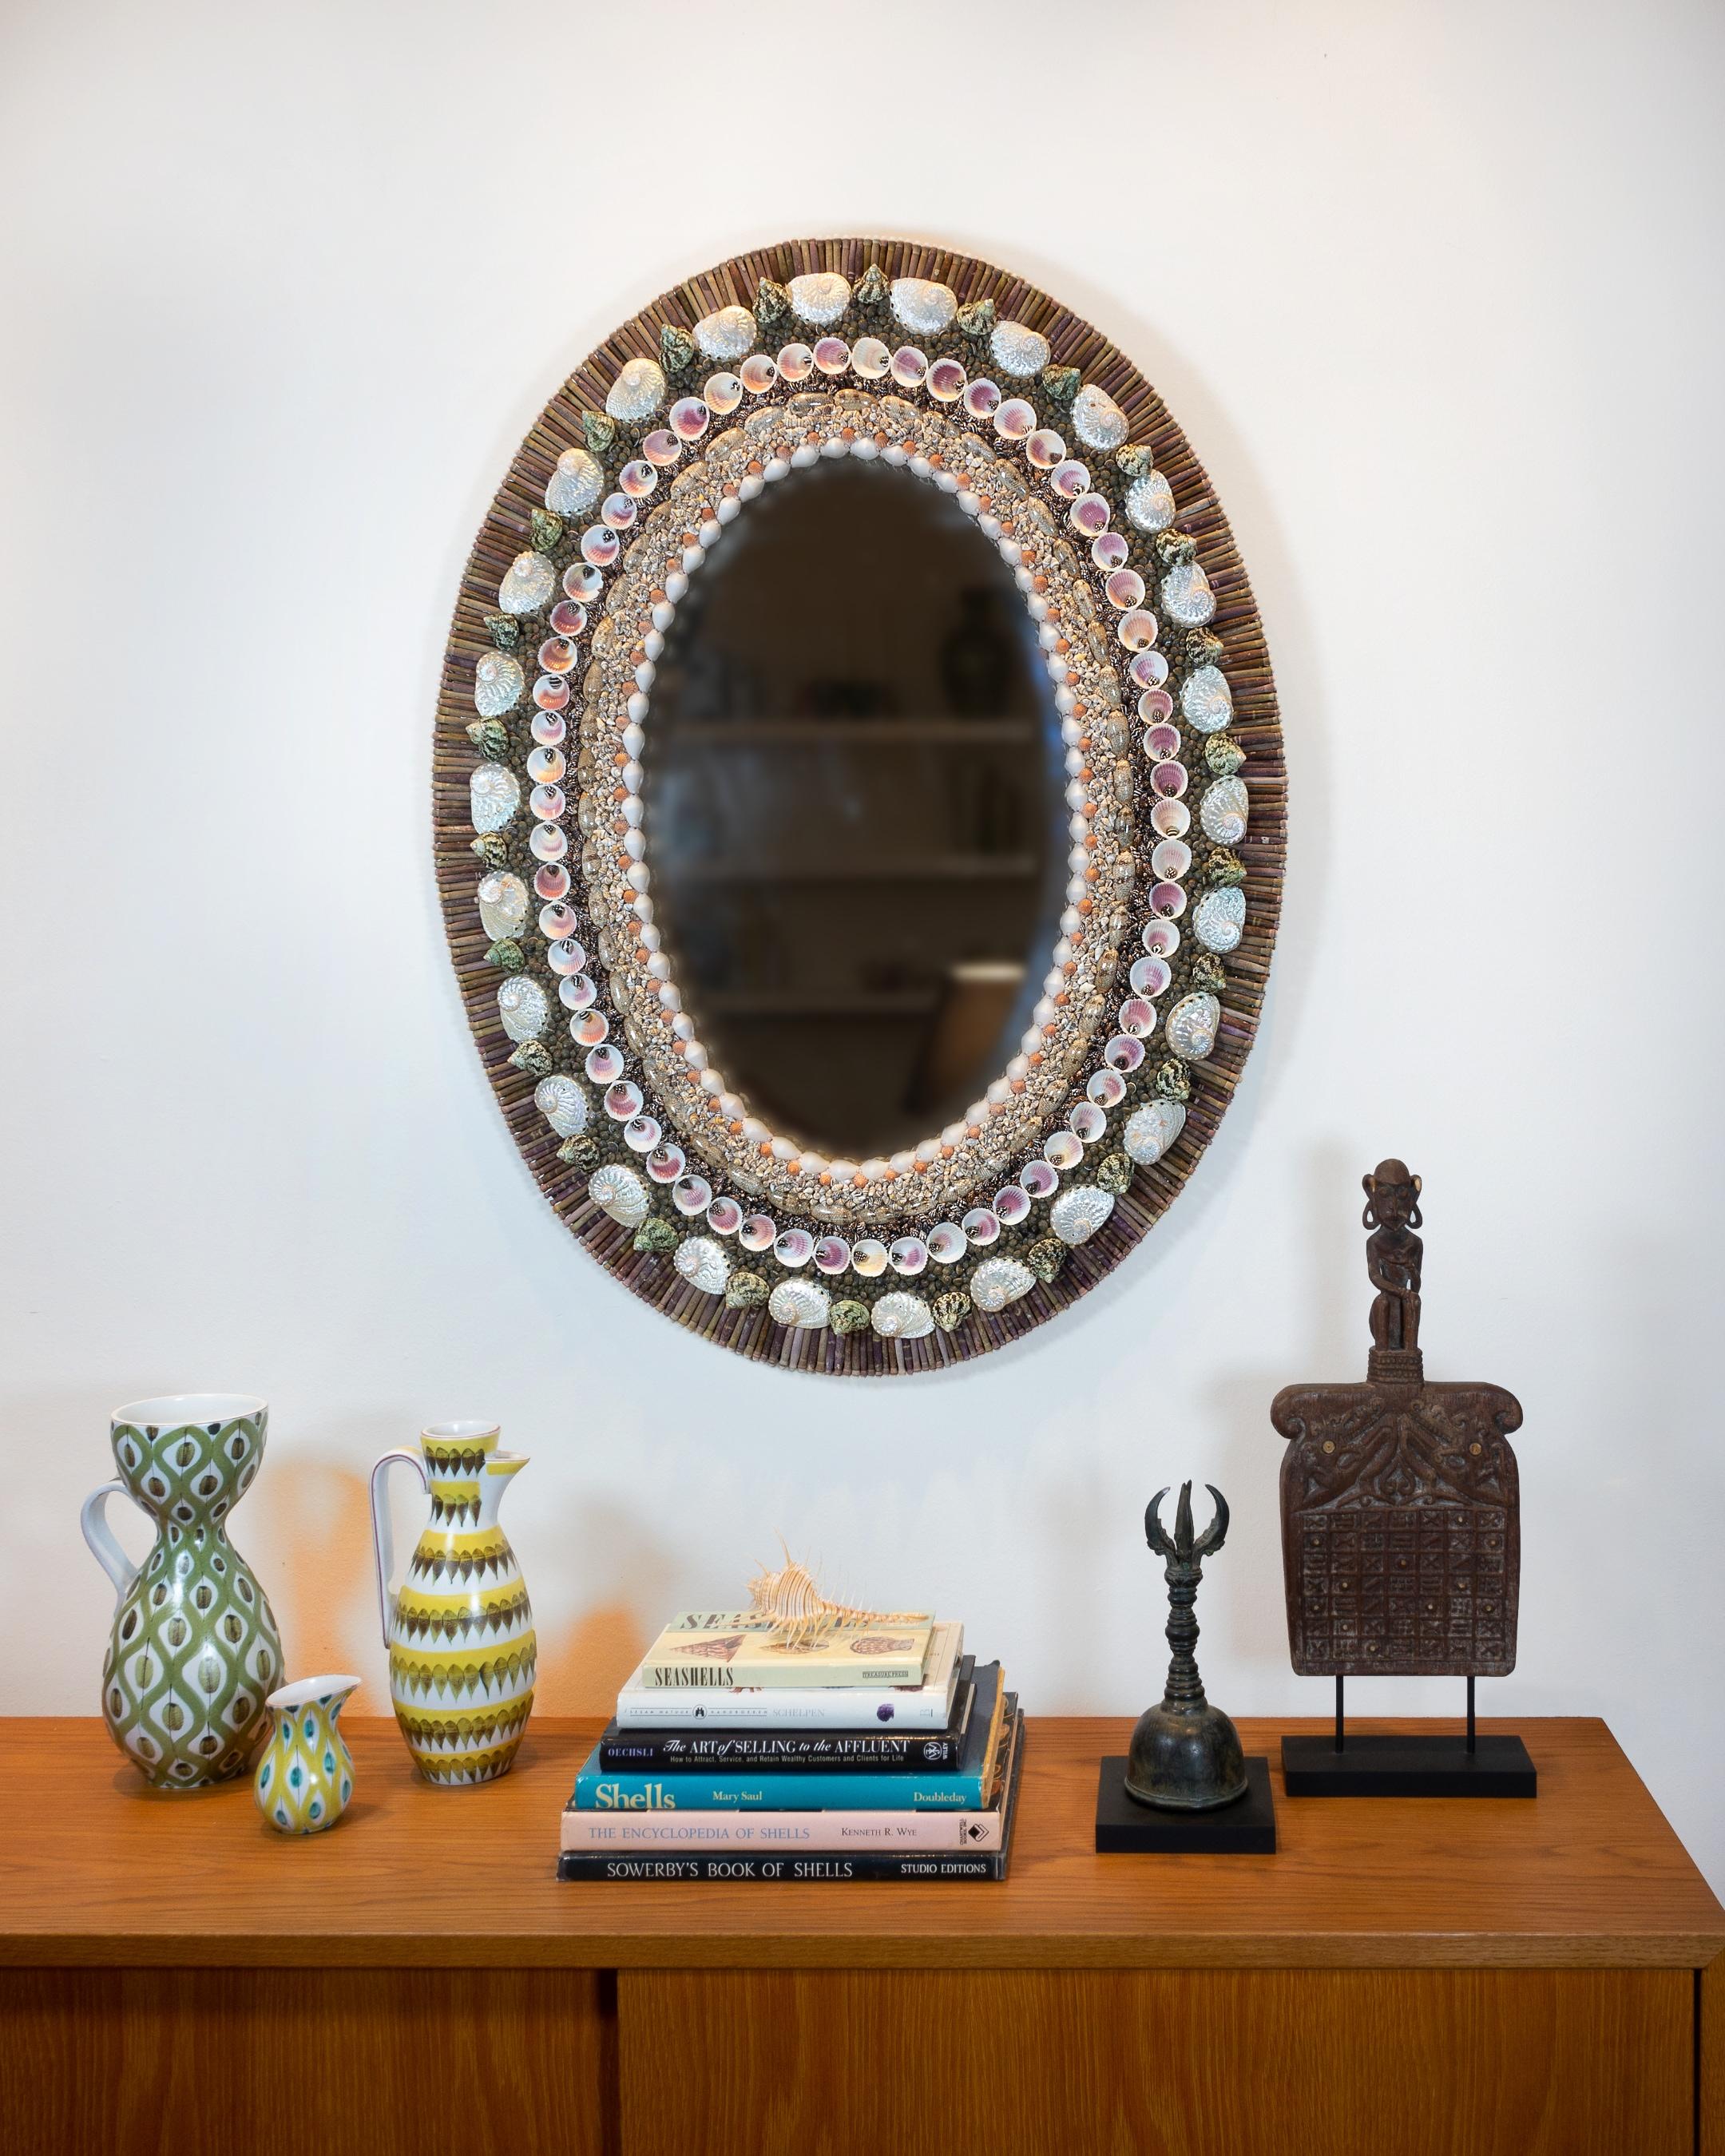 Oval Decisions – unique shell mirror by Shellman Scandinavia in Sweden.

A beautiful oval shell mirror with vintage facet cut glass from early 1900s meticulously decorated throughout with urchin spines, polished abalones and shells like olives,